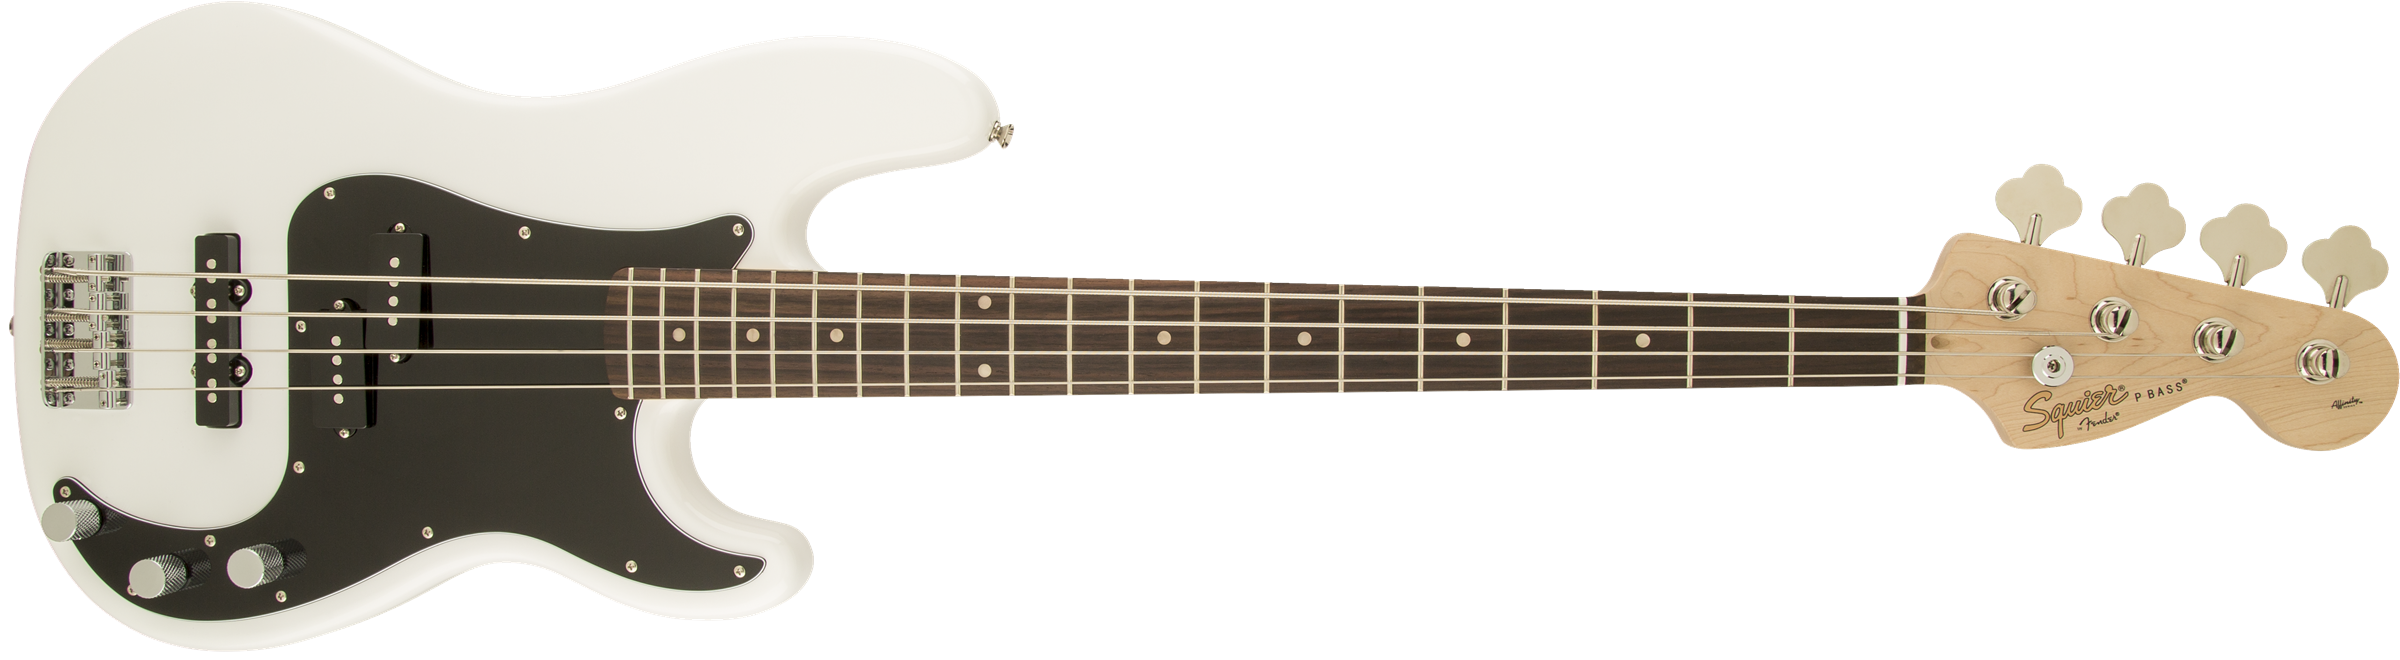 Squier Precision Bass Affinity Series Pj (lau) - Olympic White - Solid body electric bass - Variation 1